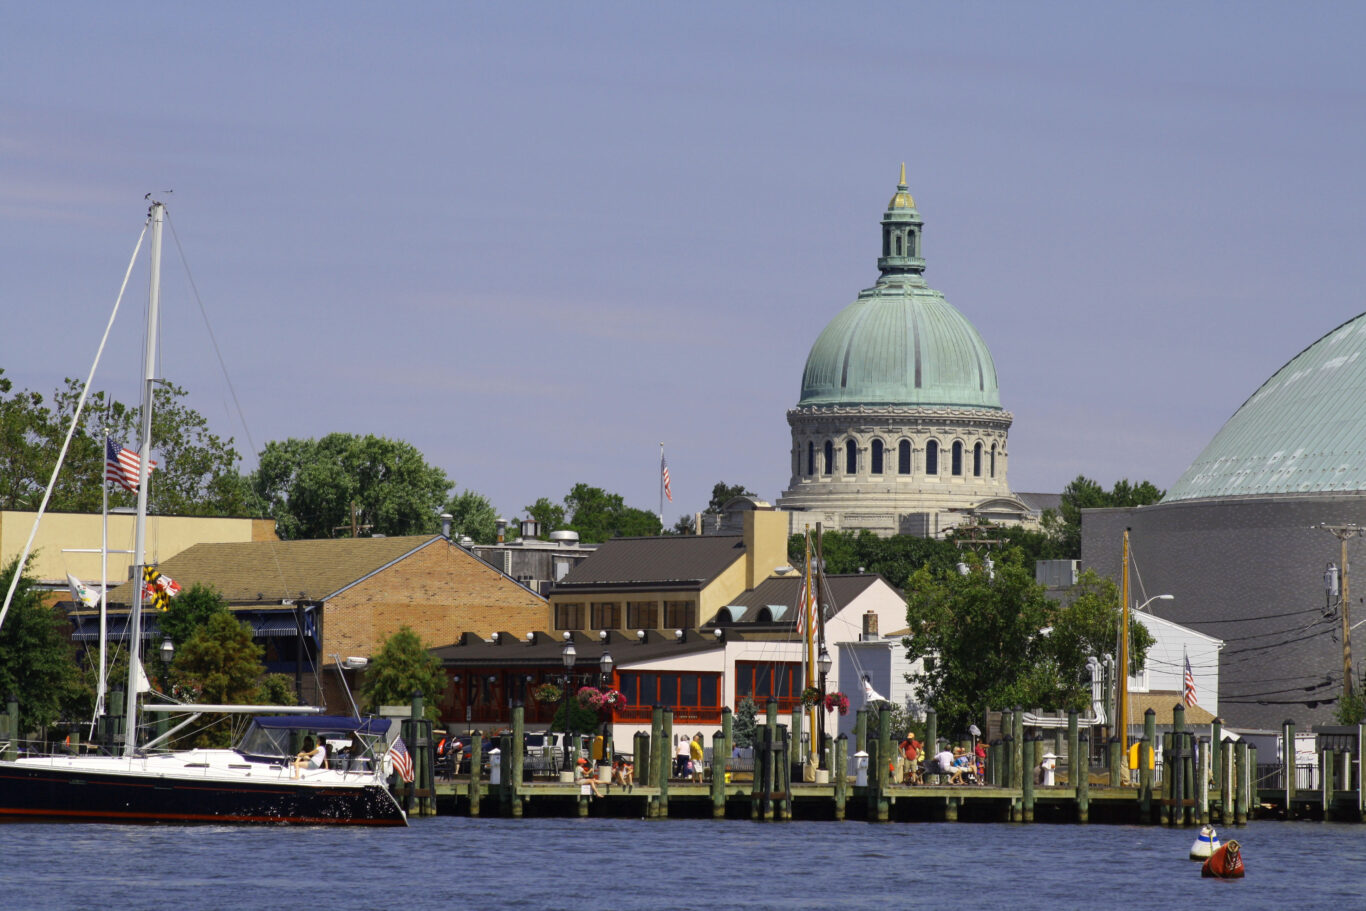 Annapolis, Maryland, USA- August 12, 2012: View of the United States Naval Academy Chapel from a boat in the Annapolis Harbor.  The people strolling on the City Dock are tourists, residents, and business people.  Annapolis is a vibrant colonial city on the Chesapeake Bay.